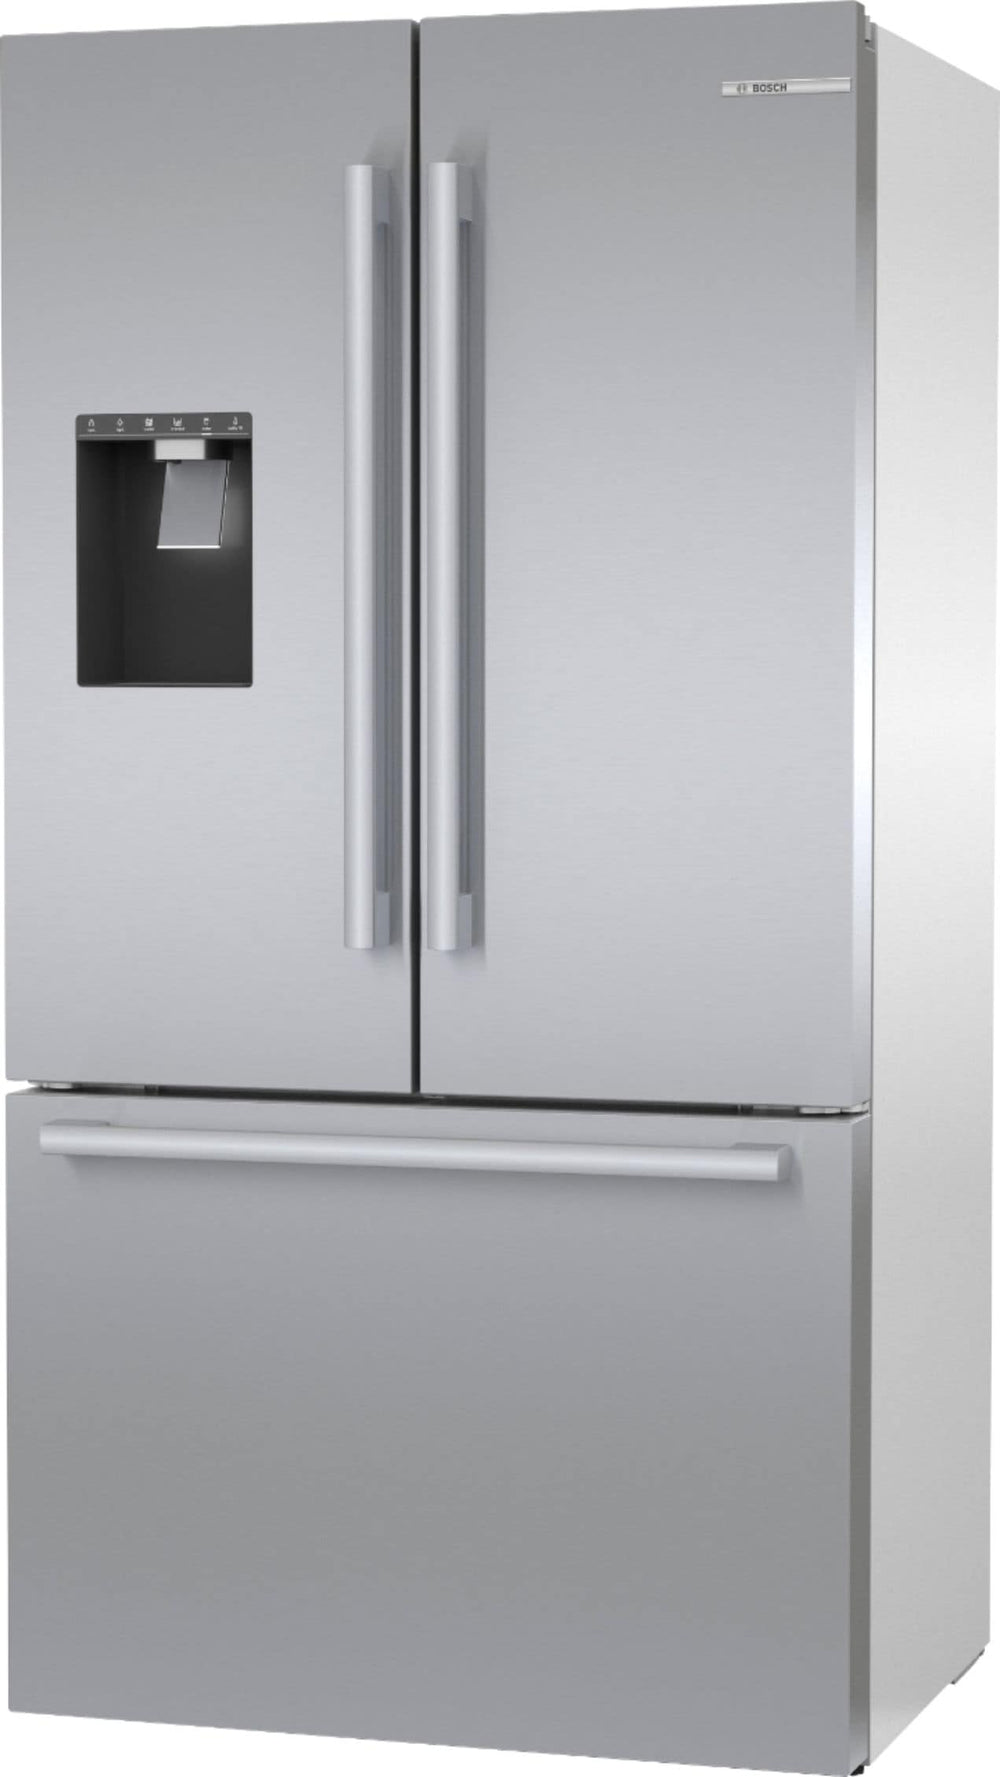 Bosch - 500 Series 21 Cu. Ft. French Door Counter-Depth Smart Refrigerator with External Water and Ice Maker - Stainless steel_1